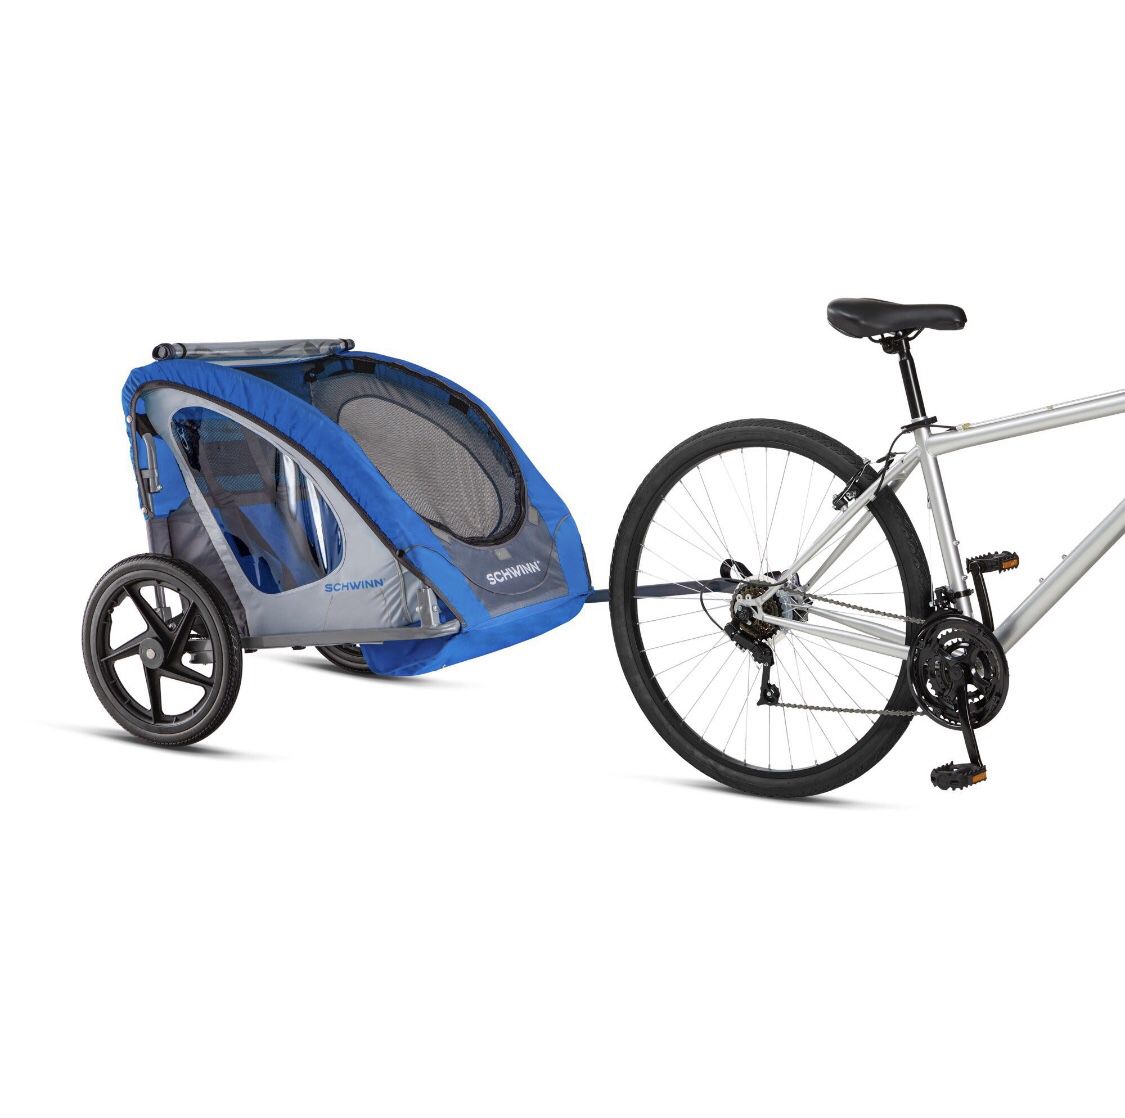 Bicycle Trailer (For Small Child, Pet or Gear)